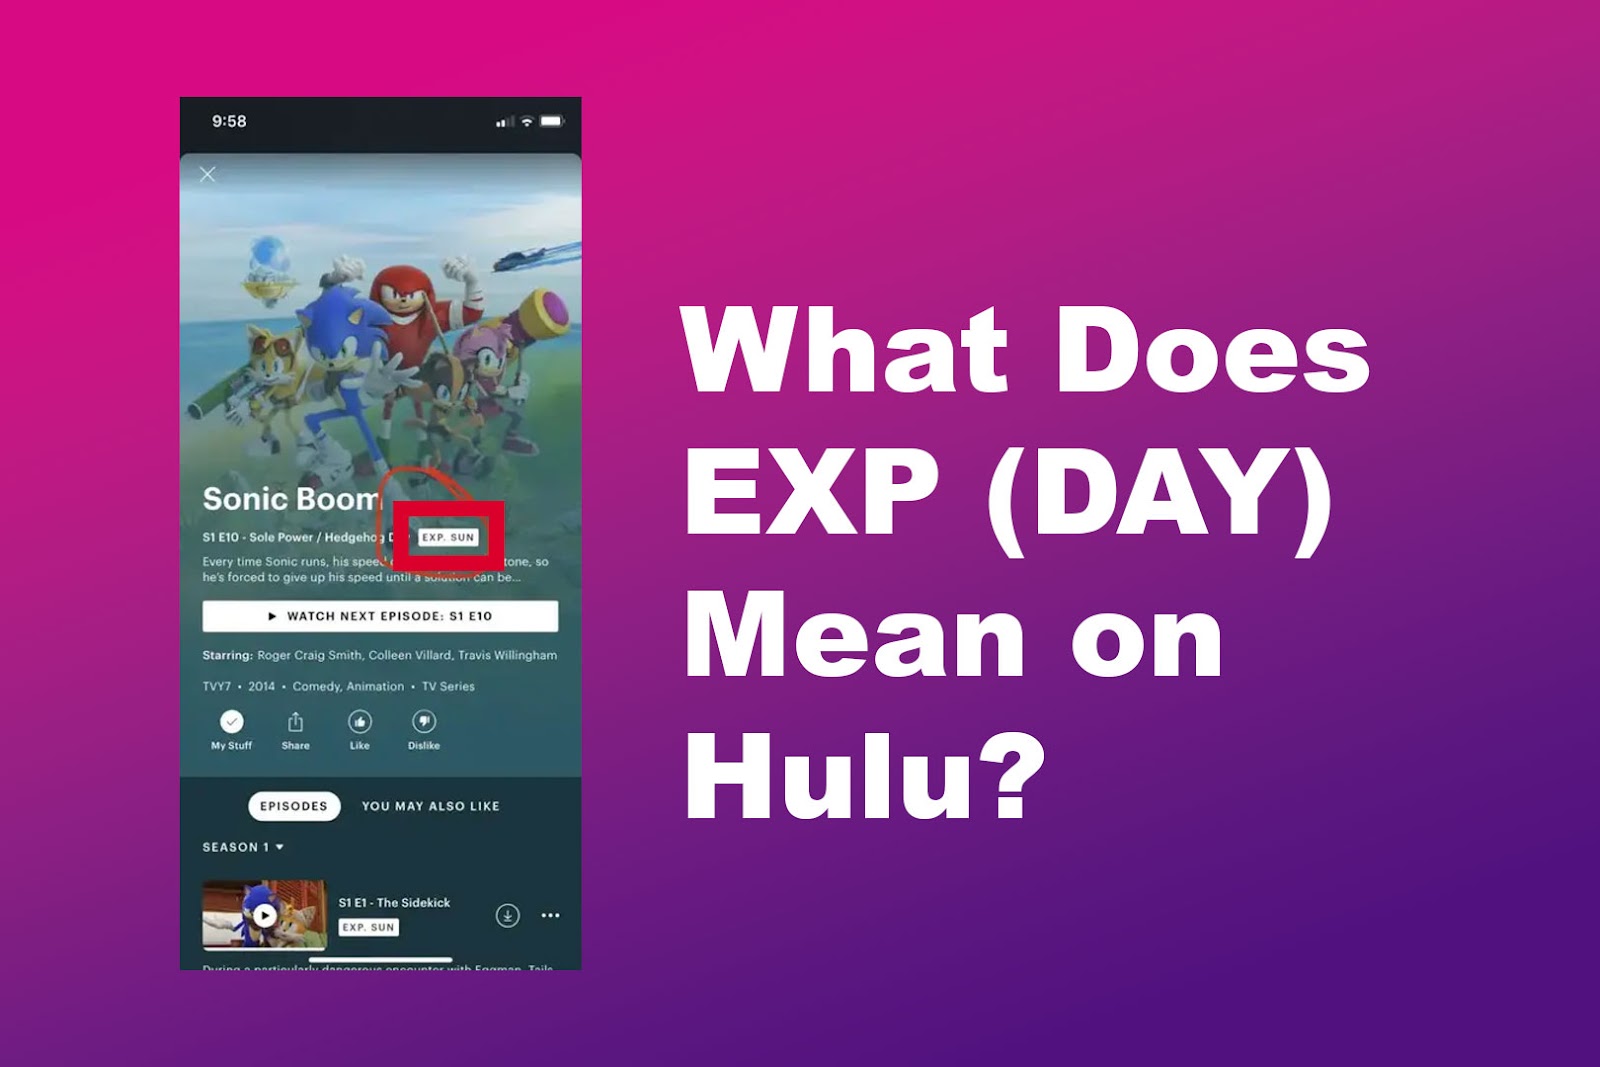 What Does EXP Wed Mean on Hulu